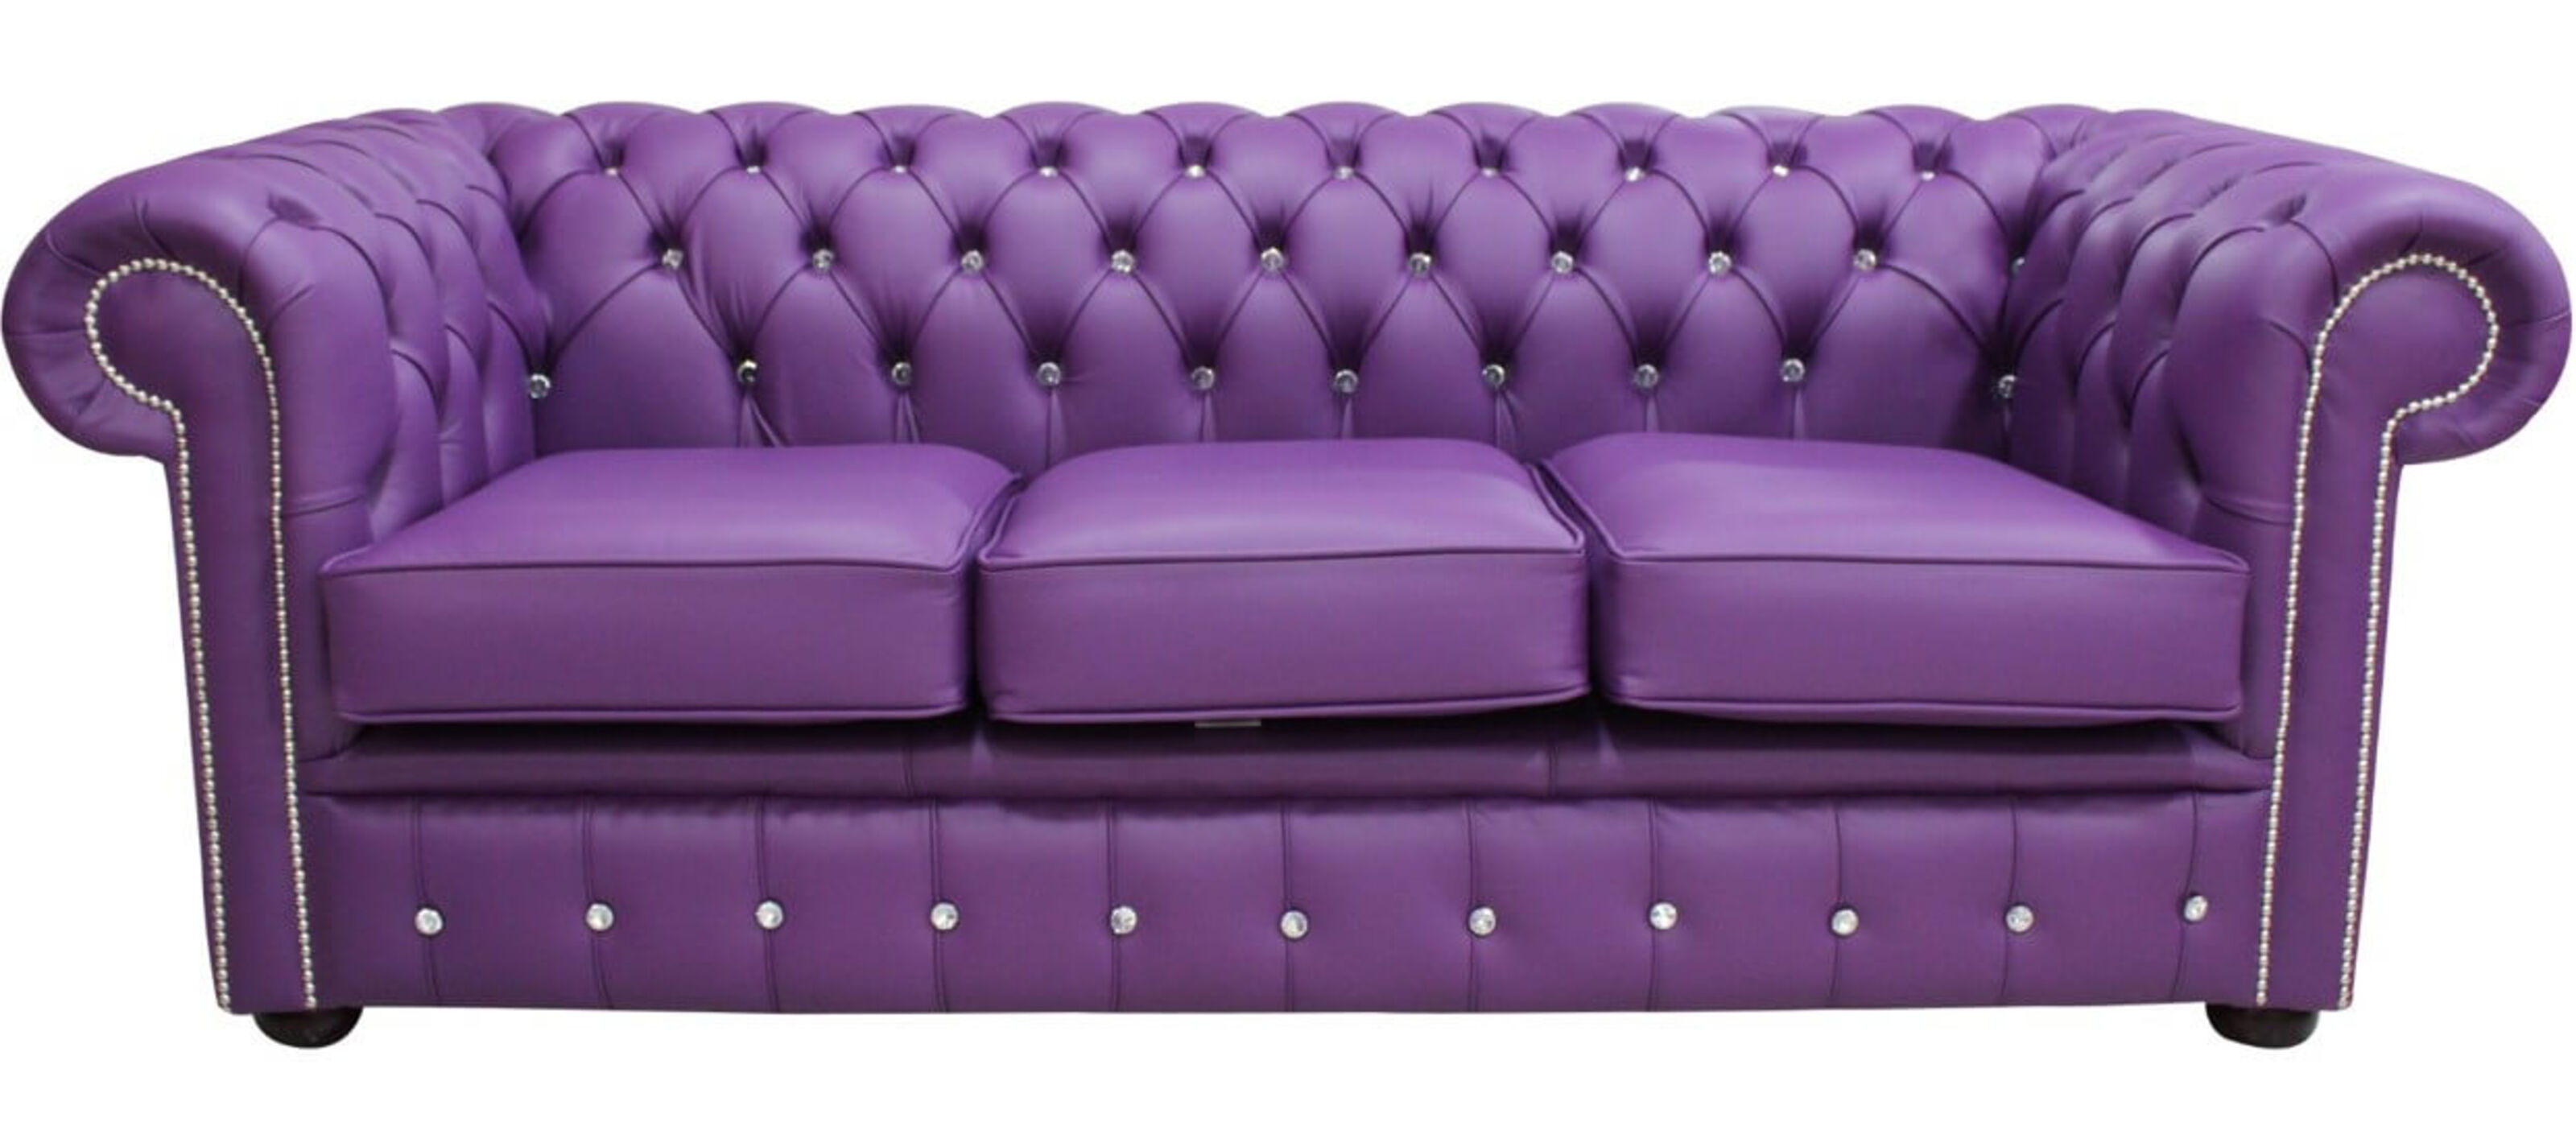 Chesterfield Crystal Diamond Diamante, Purple Leather Couch